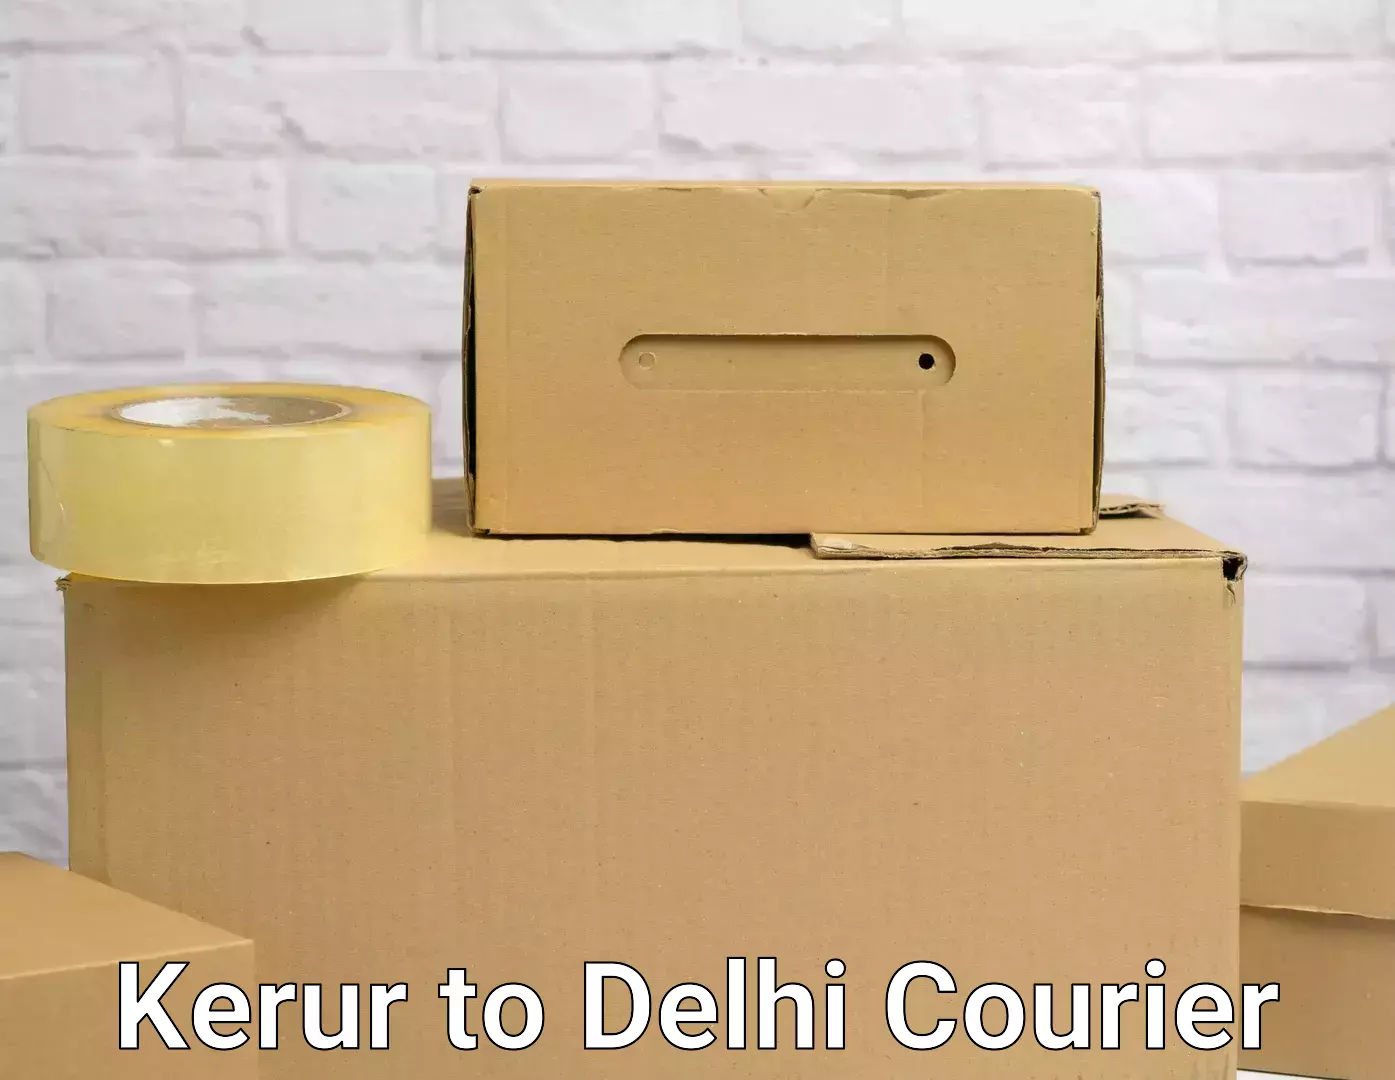 Quality relocation assistance Kerur to NCR